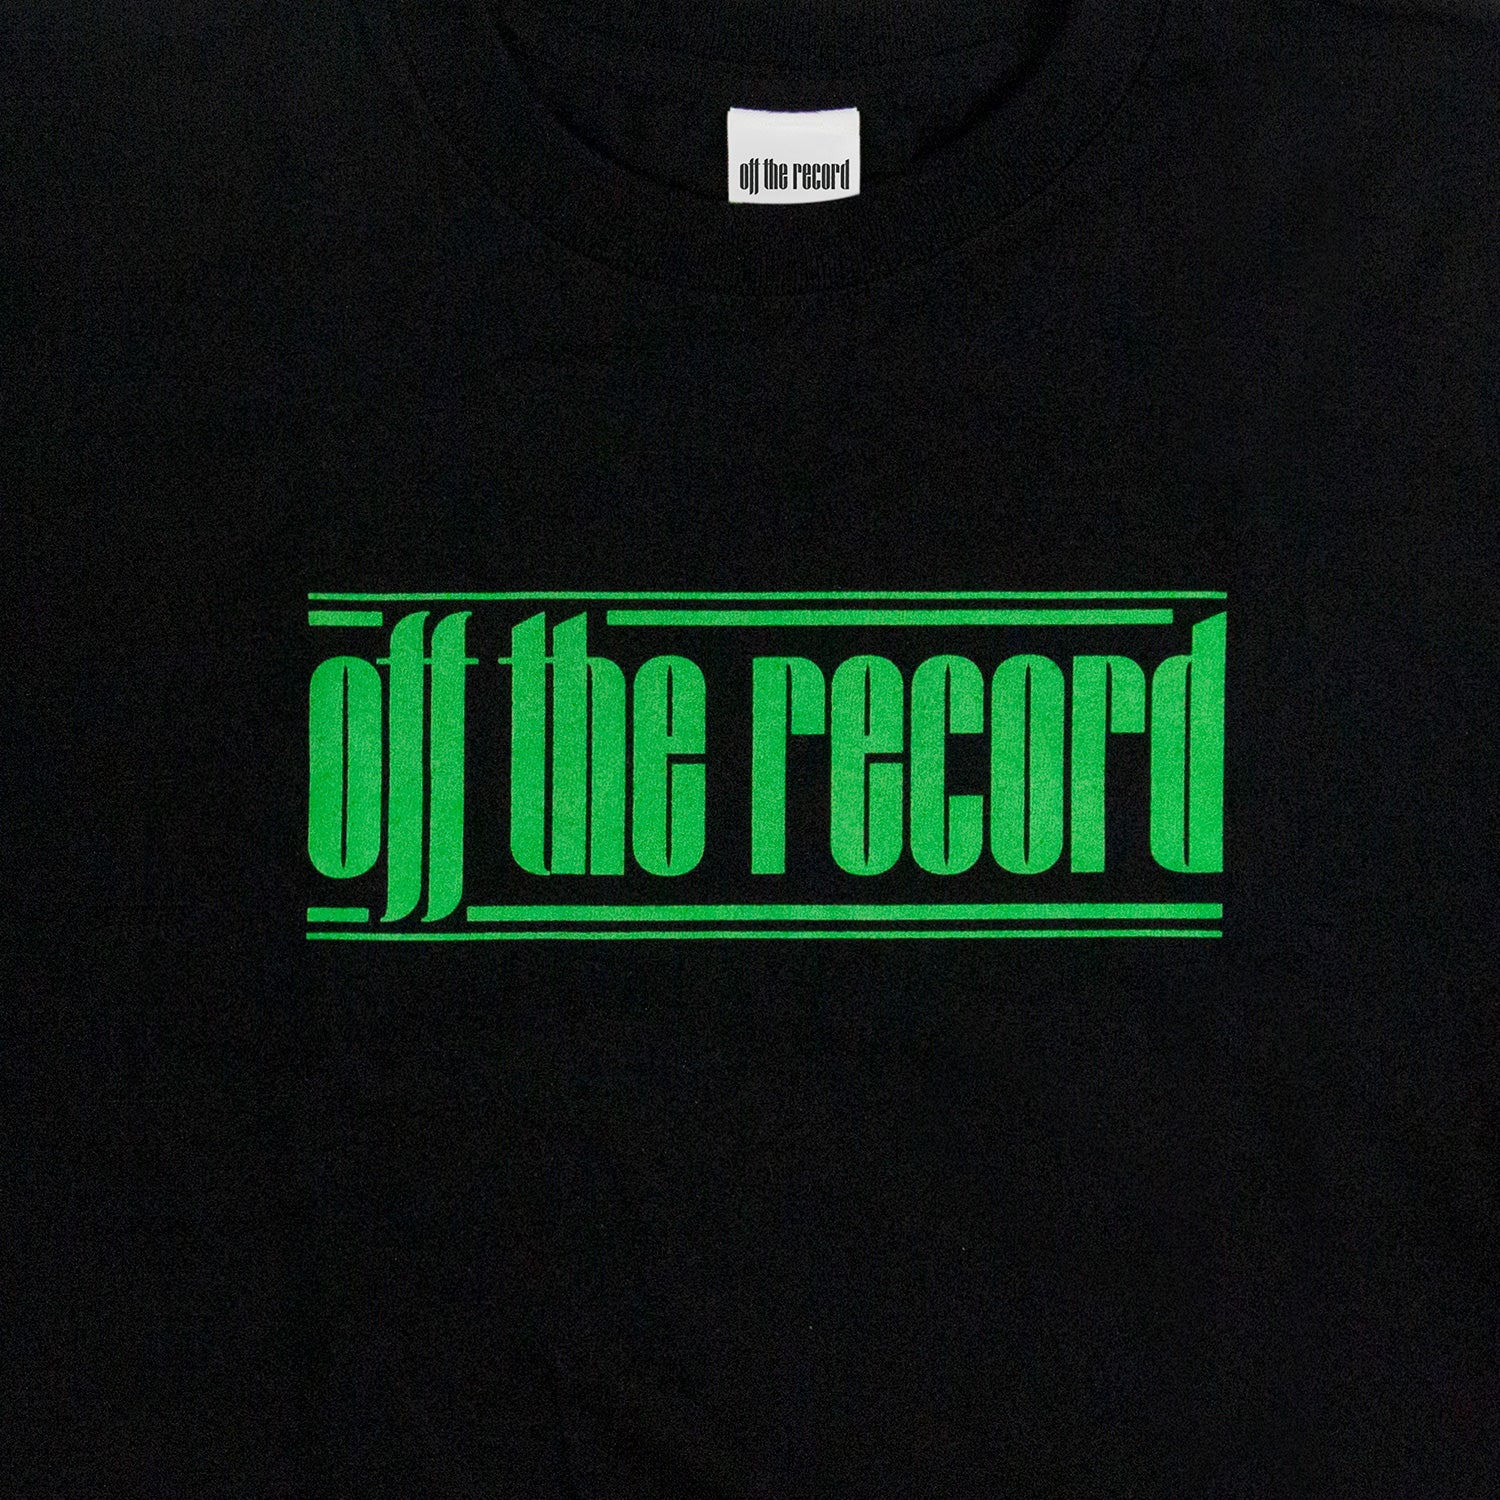 T-SHIRT【L】 / WOOYOUNG (From 2PM)『Off the record』